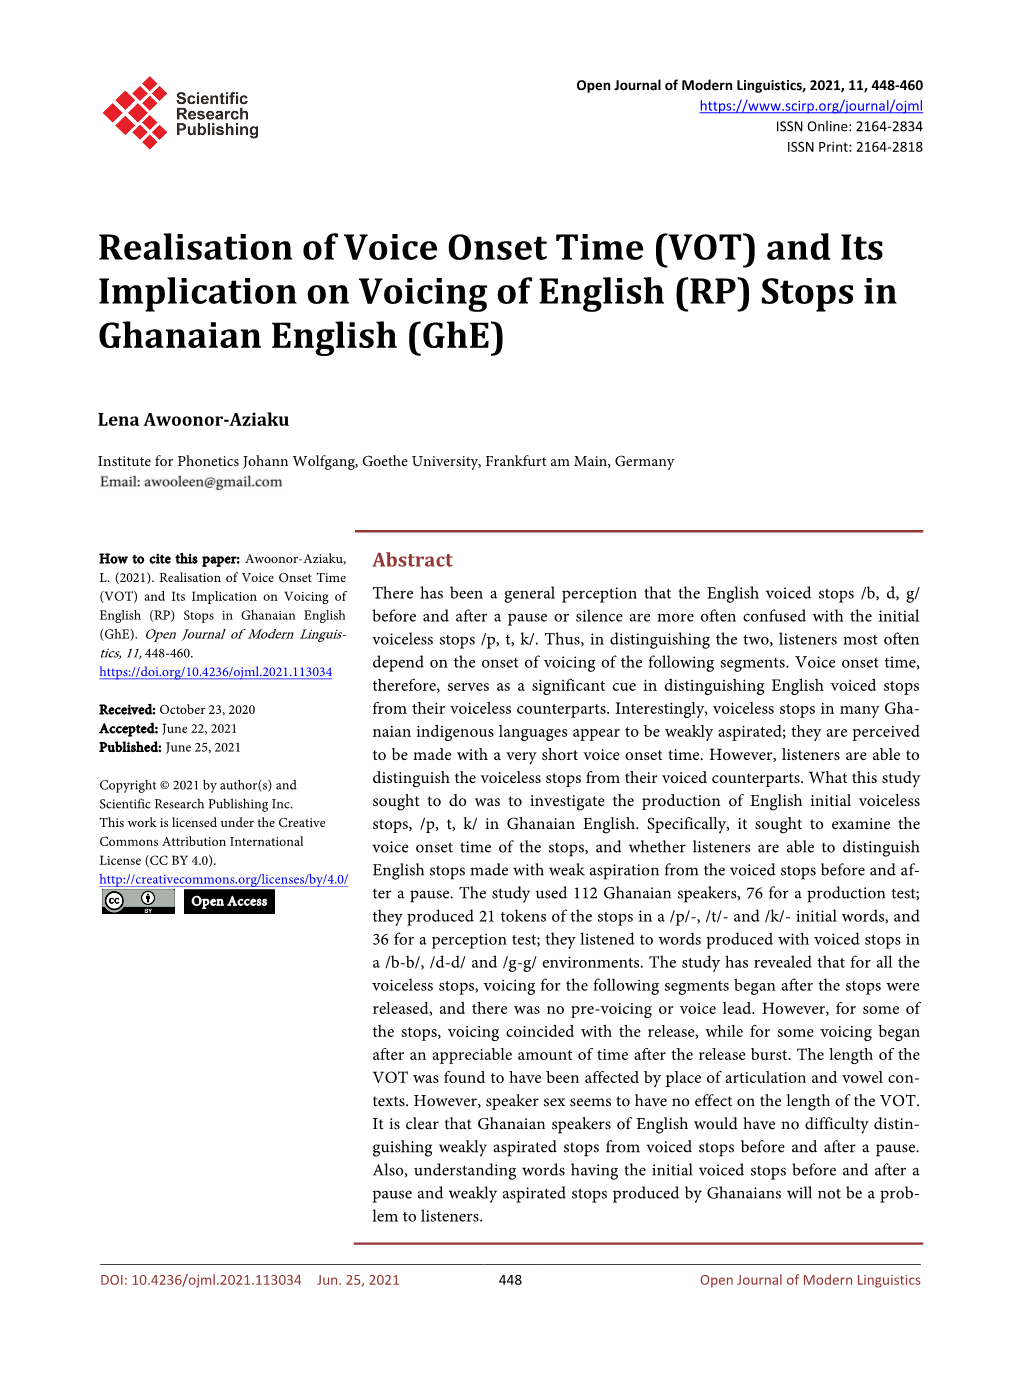 Realisation of Voice Onset Time (VOT) and Its Implication on Voicing of English (RP) Stops in Ghanaian English (Ghe)